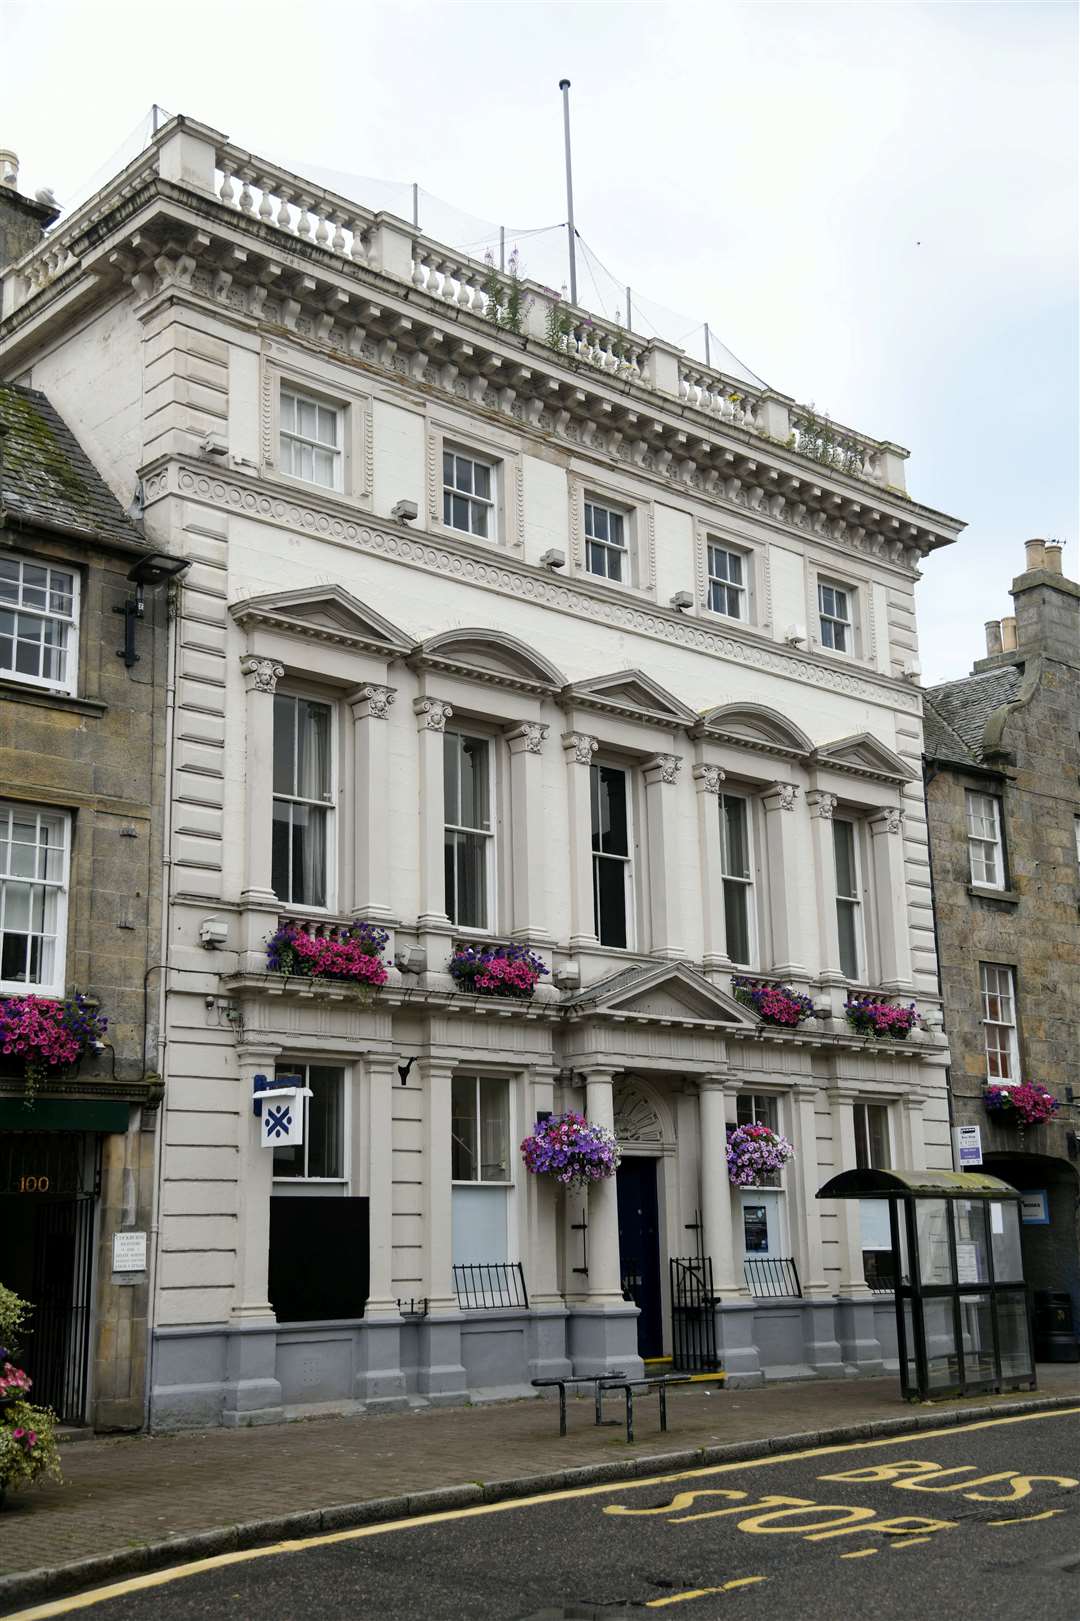 The old Bank of Scotland building.